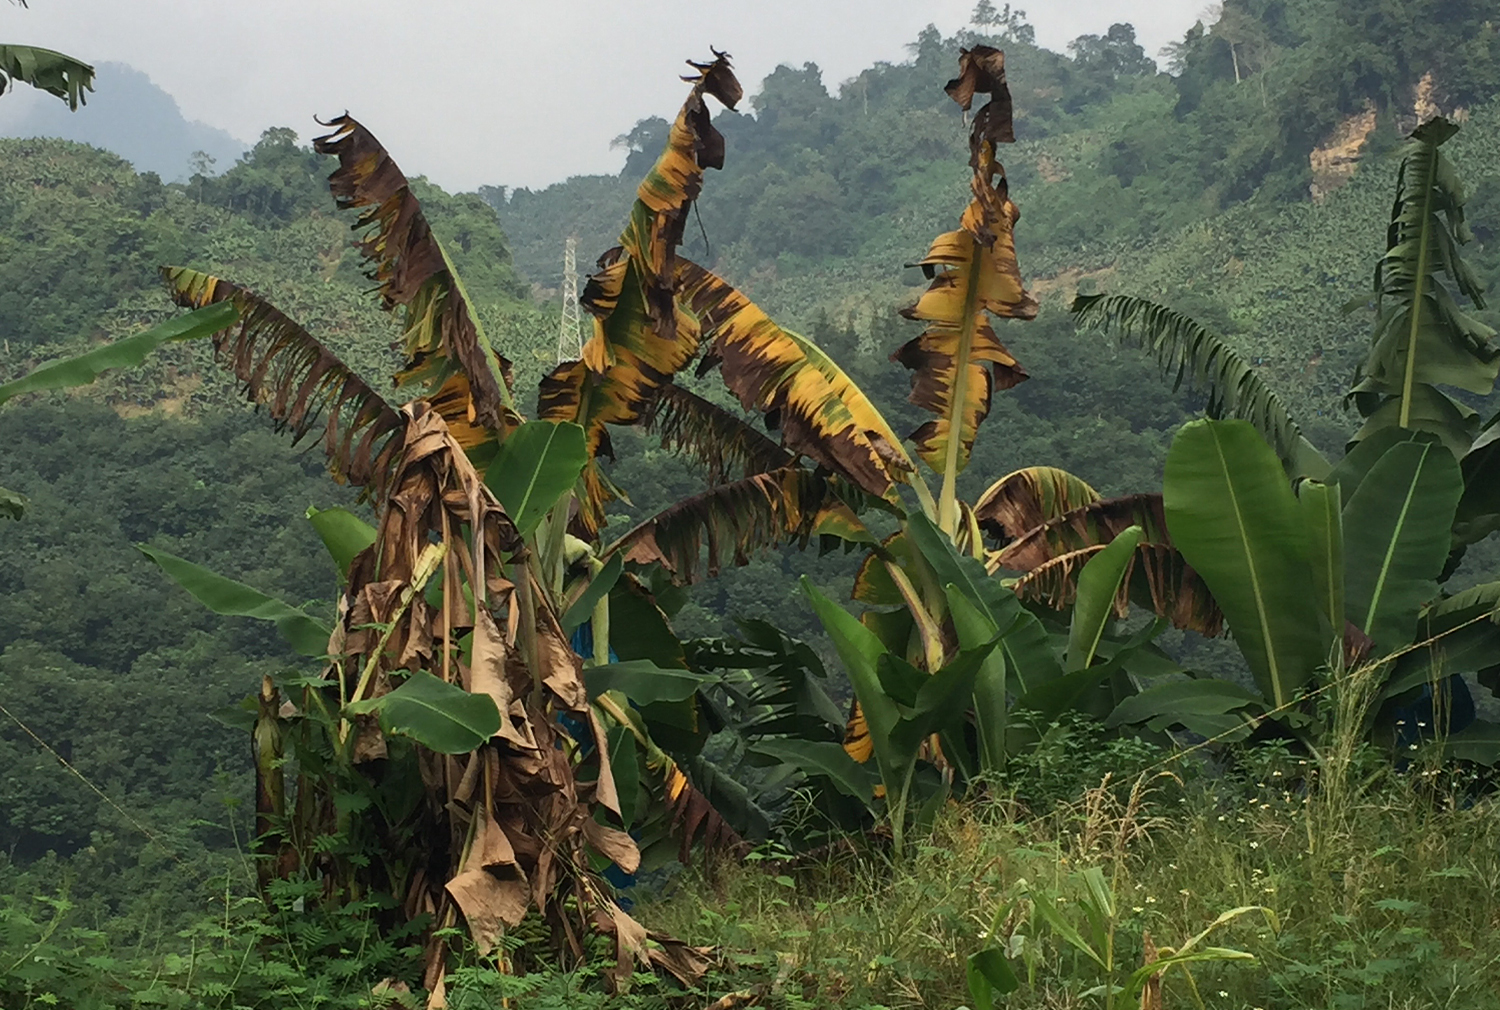 New Banana Disease Is Spreading Fast Andposes Threat To Africa S Food Security Mirage News